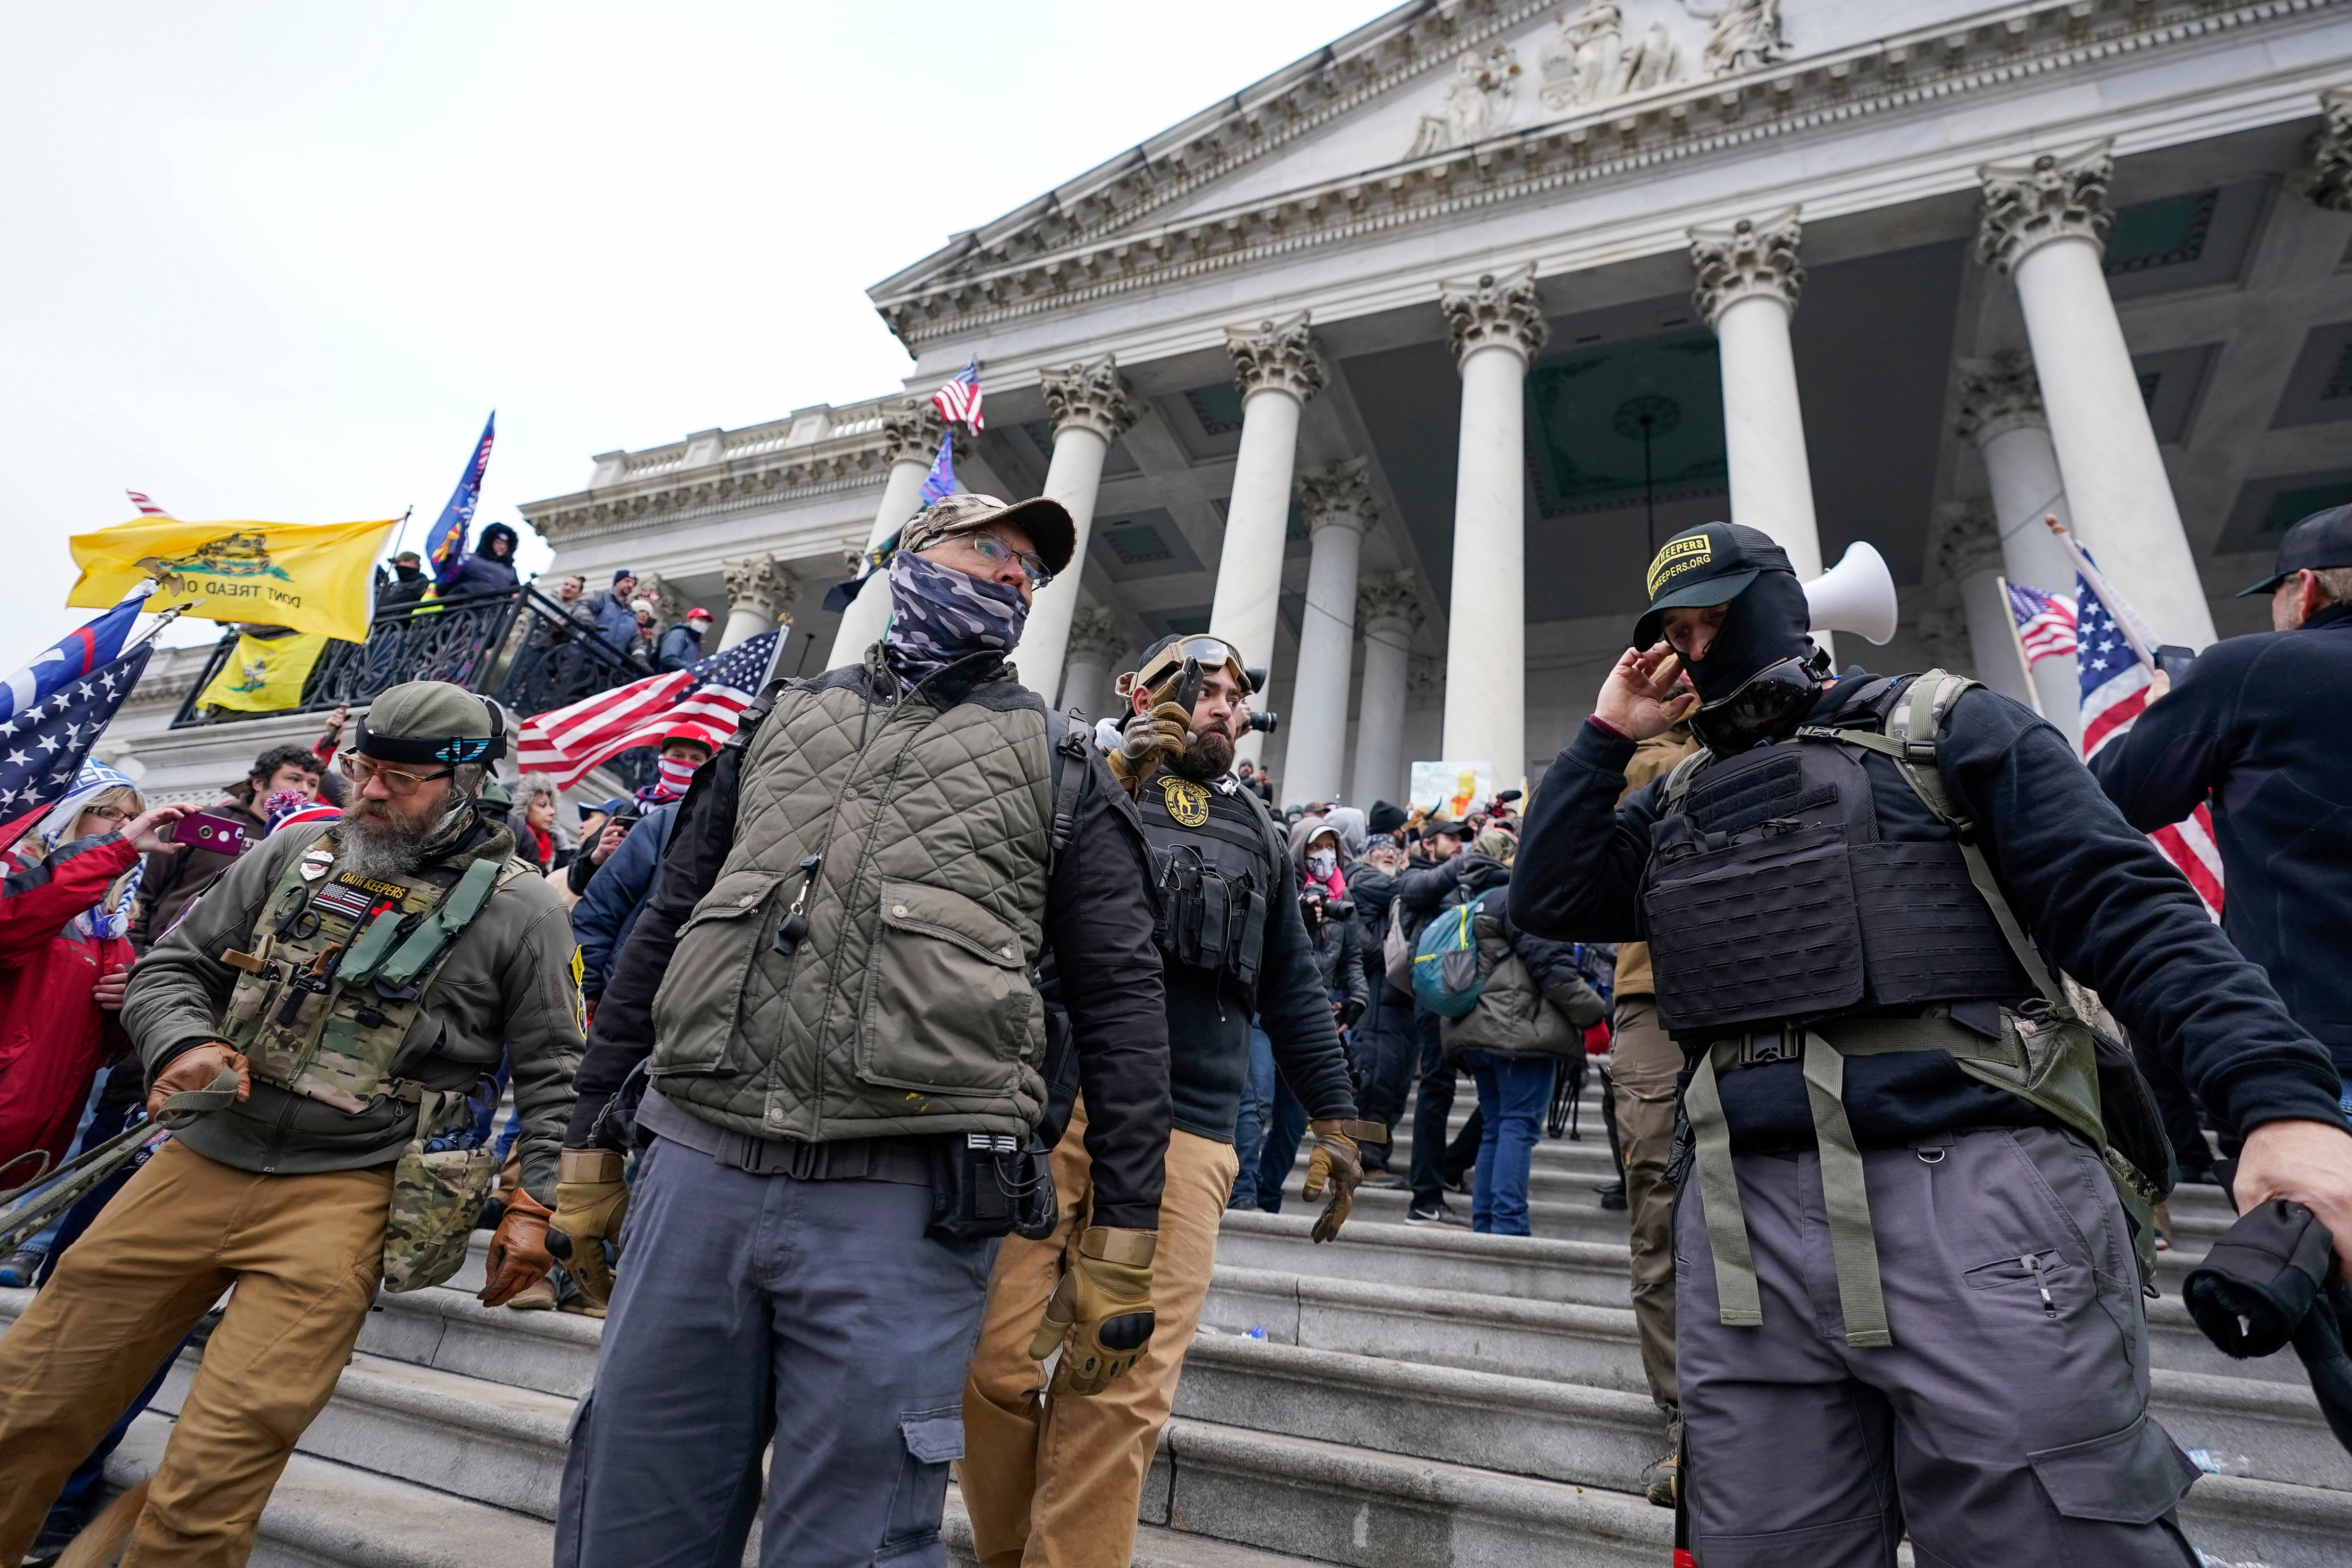 Members of the Oath Keepers extremist group stand on the East Front of the U.S. Capitol on Jan. 6, 2021. (Manuel Balce Ceneta/AP)